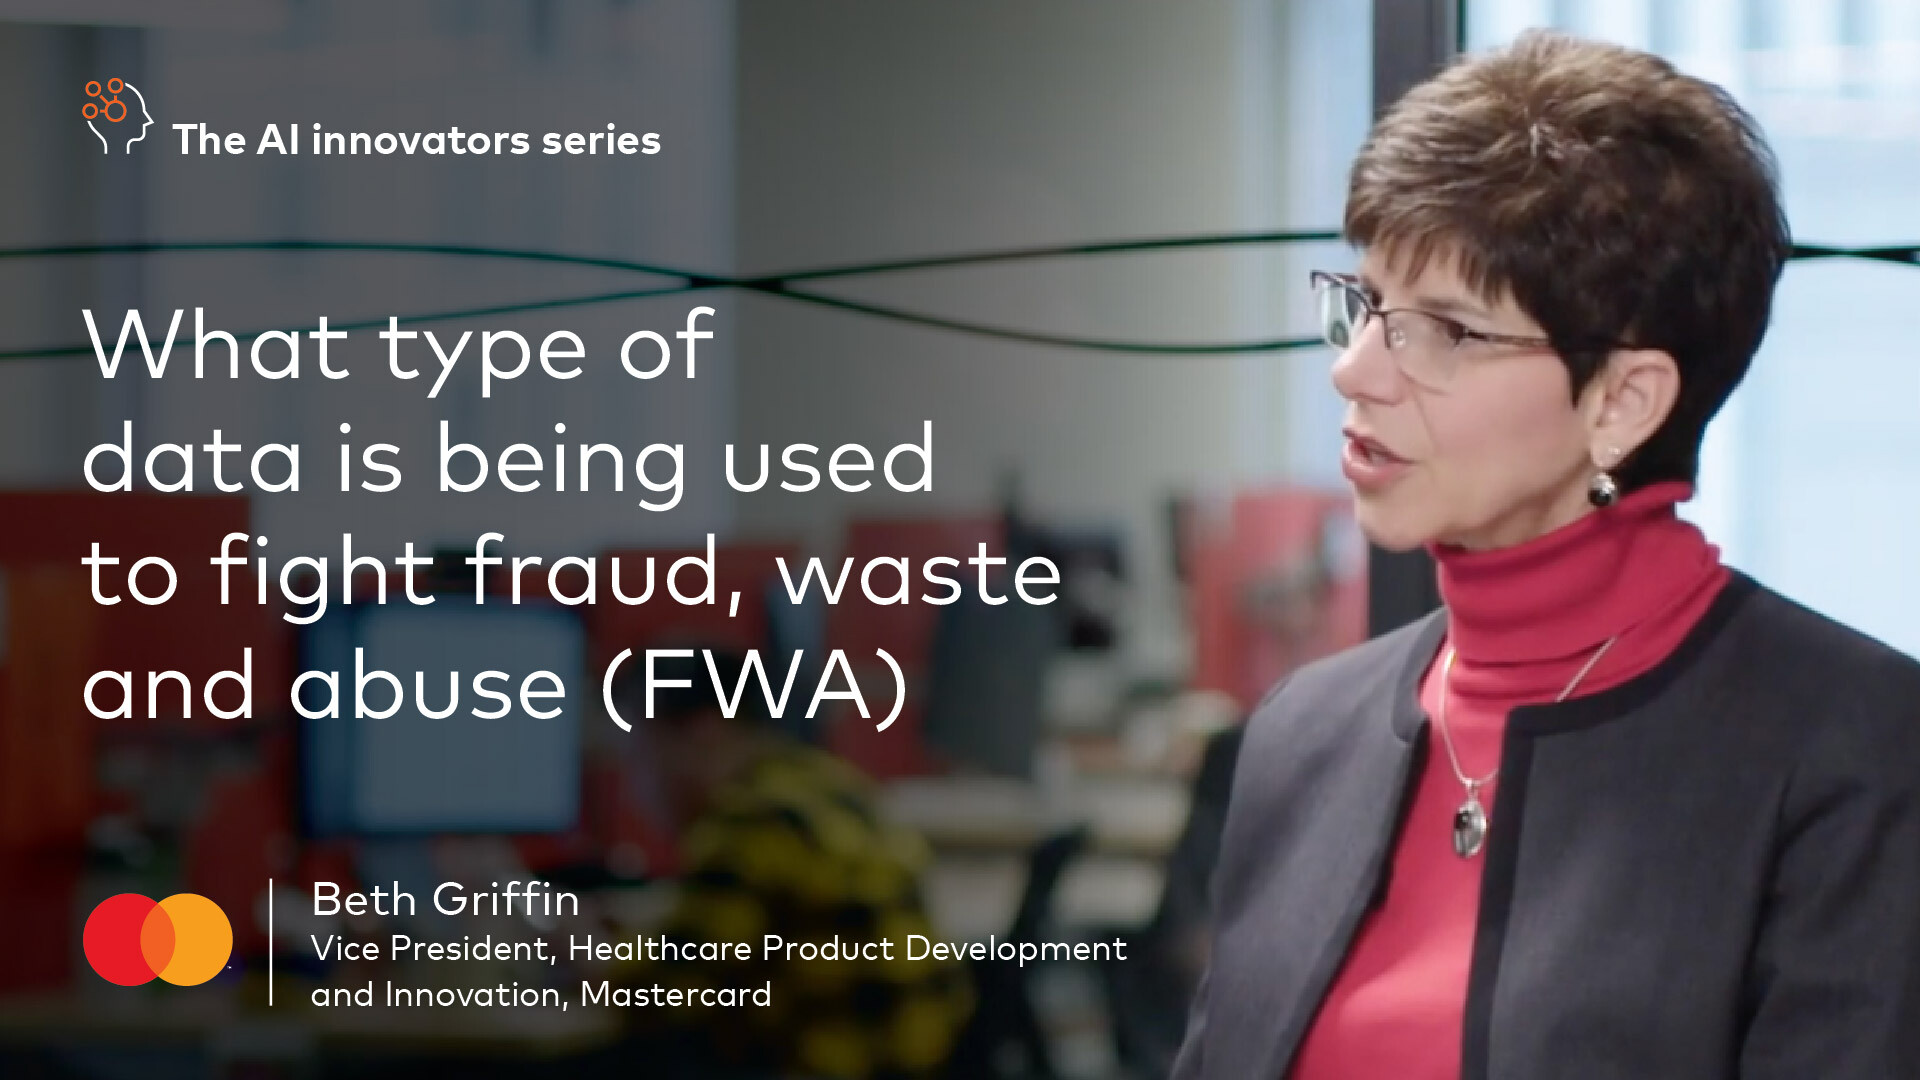 What type of data is being used to fight fraud, waste and abuse (FWA)